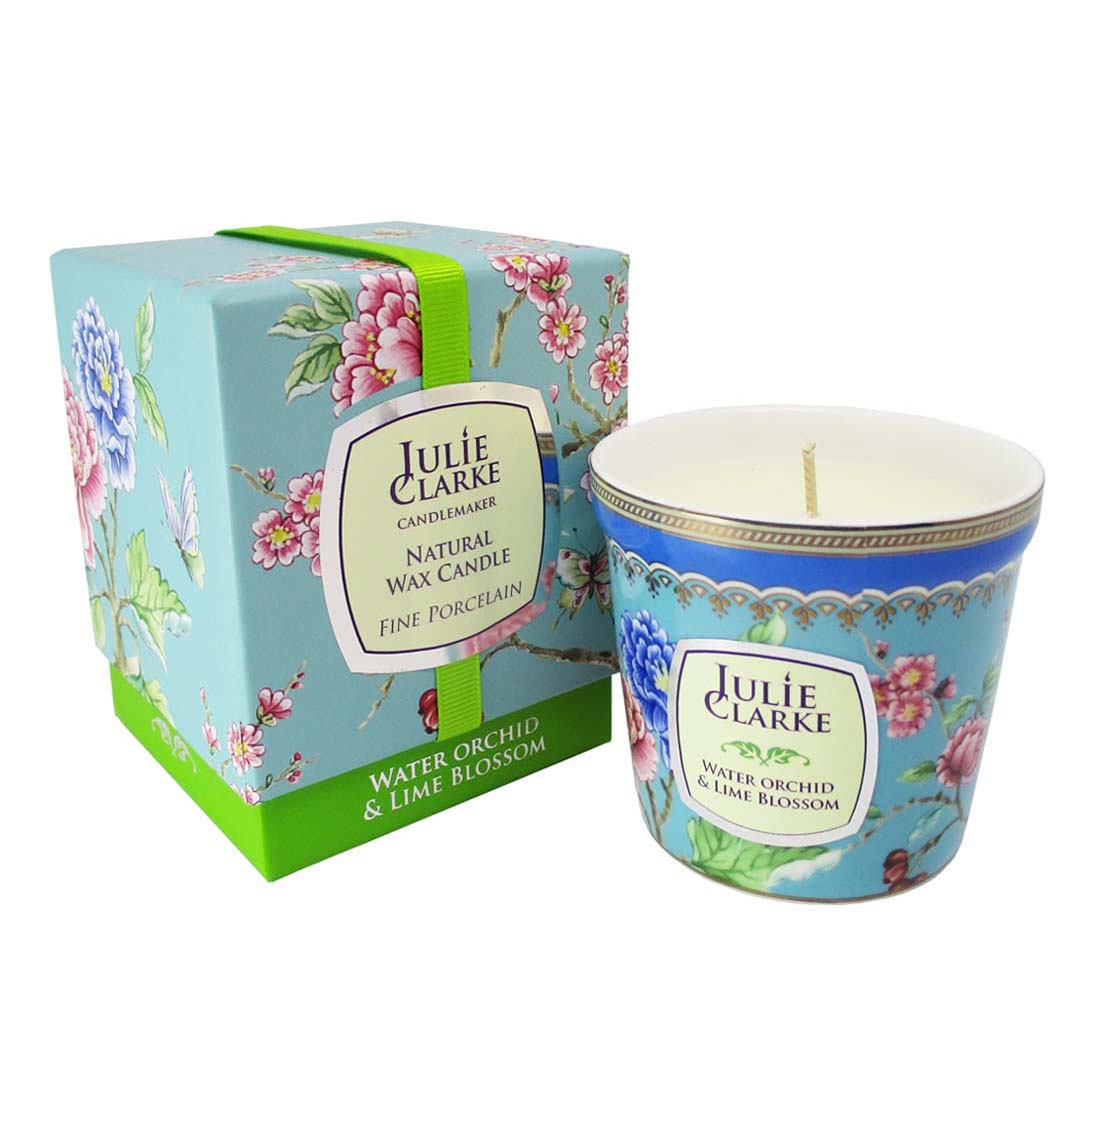 JULIE CLARKE - WATER ORCHID & LIME BLOSSOM Mrs Tea's Boutique and Bakery